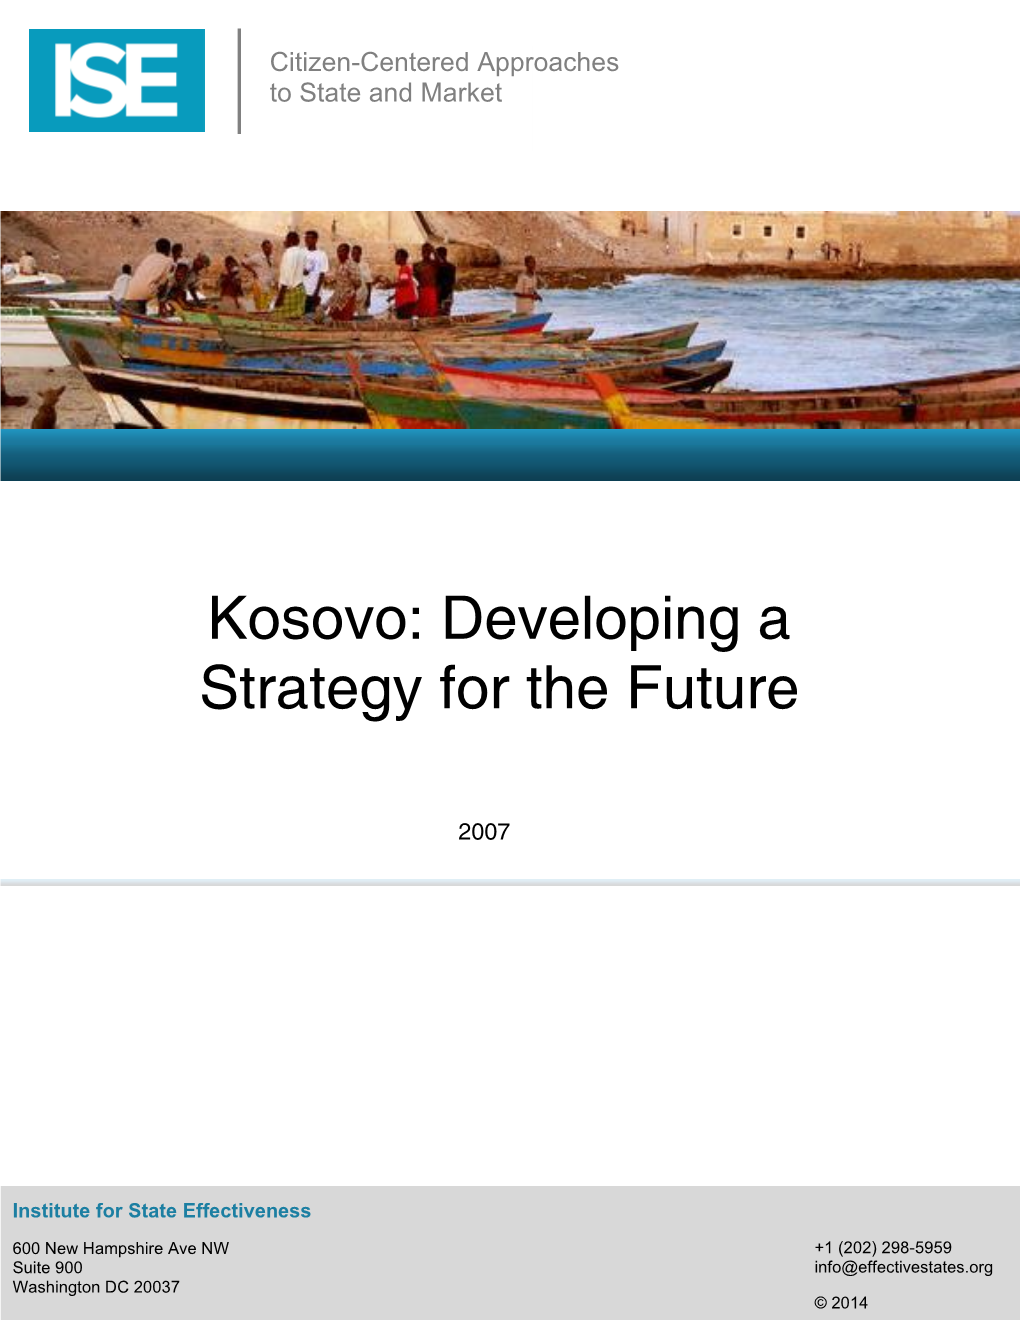 Kosovo: Developing a Strategy for the Future